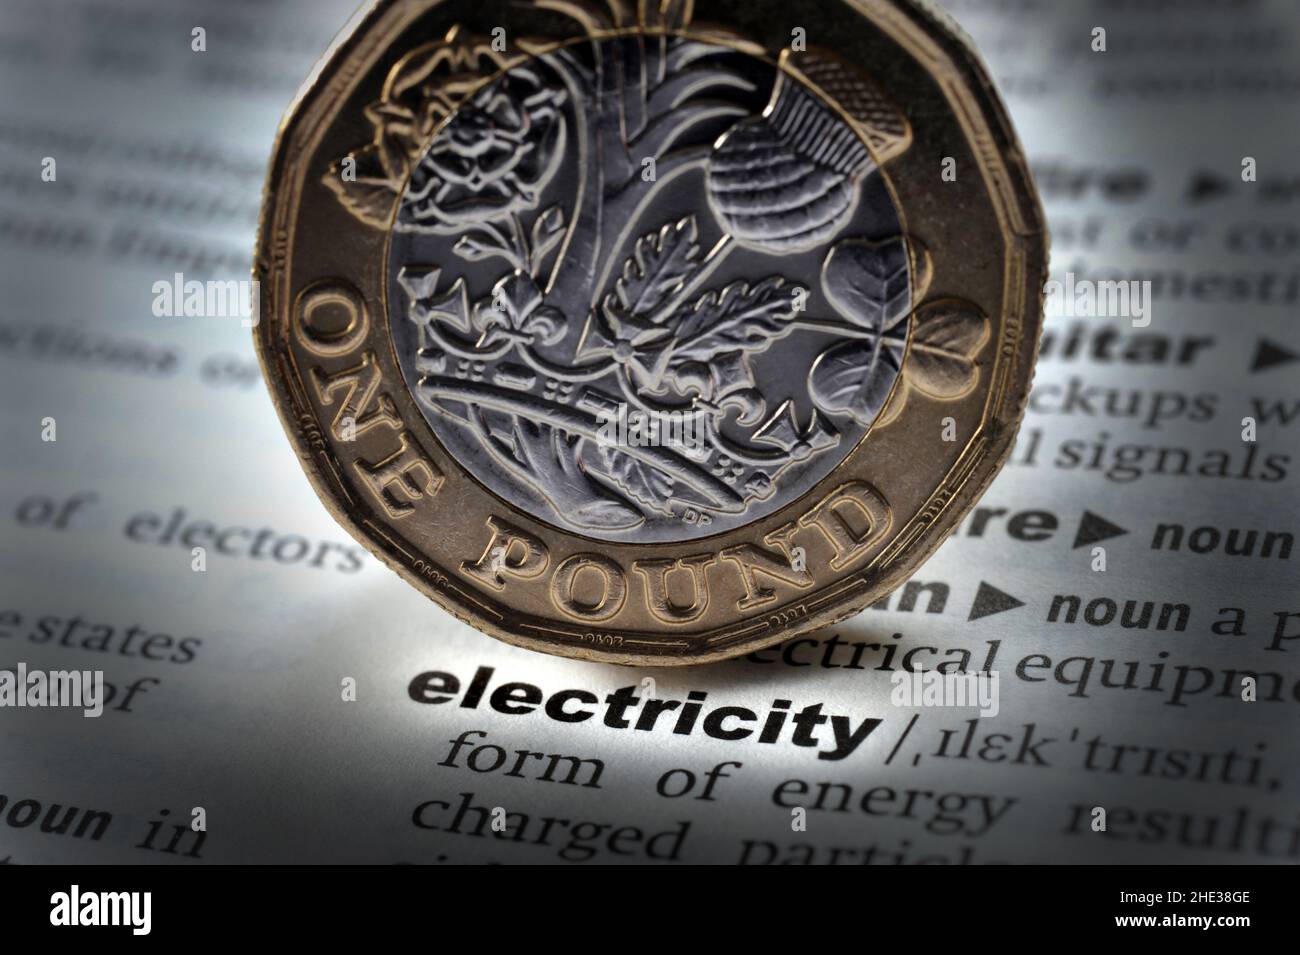 DICTIONARY DEFINITION OF WORD ELECTRICITY WITH ONE POUND COIN RE FUEL ENERGY COSTS HEATING RISING HOUSEHOLD BUDGETS ETC UK Stock Photo